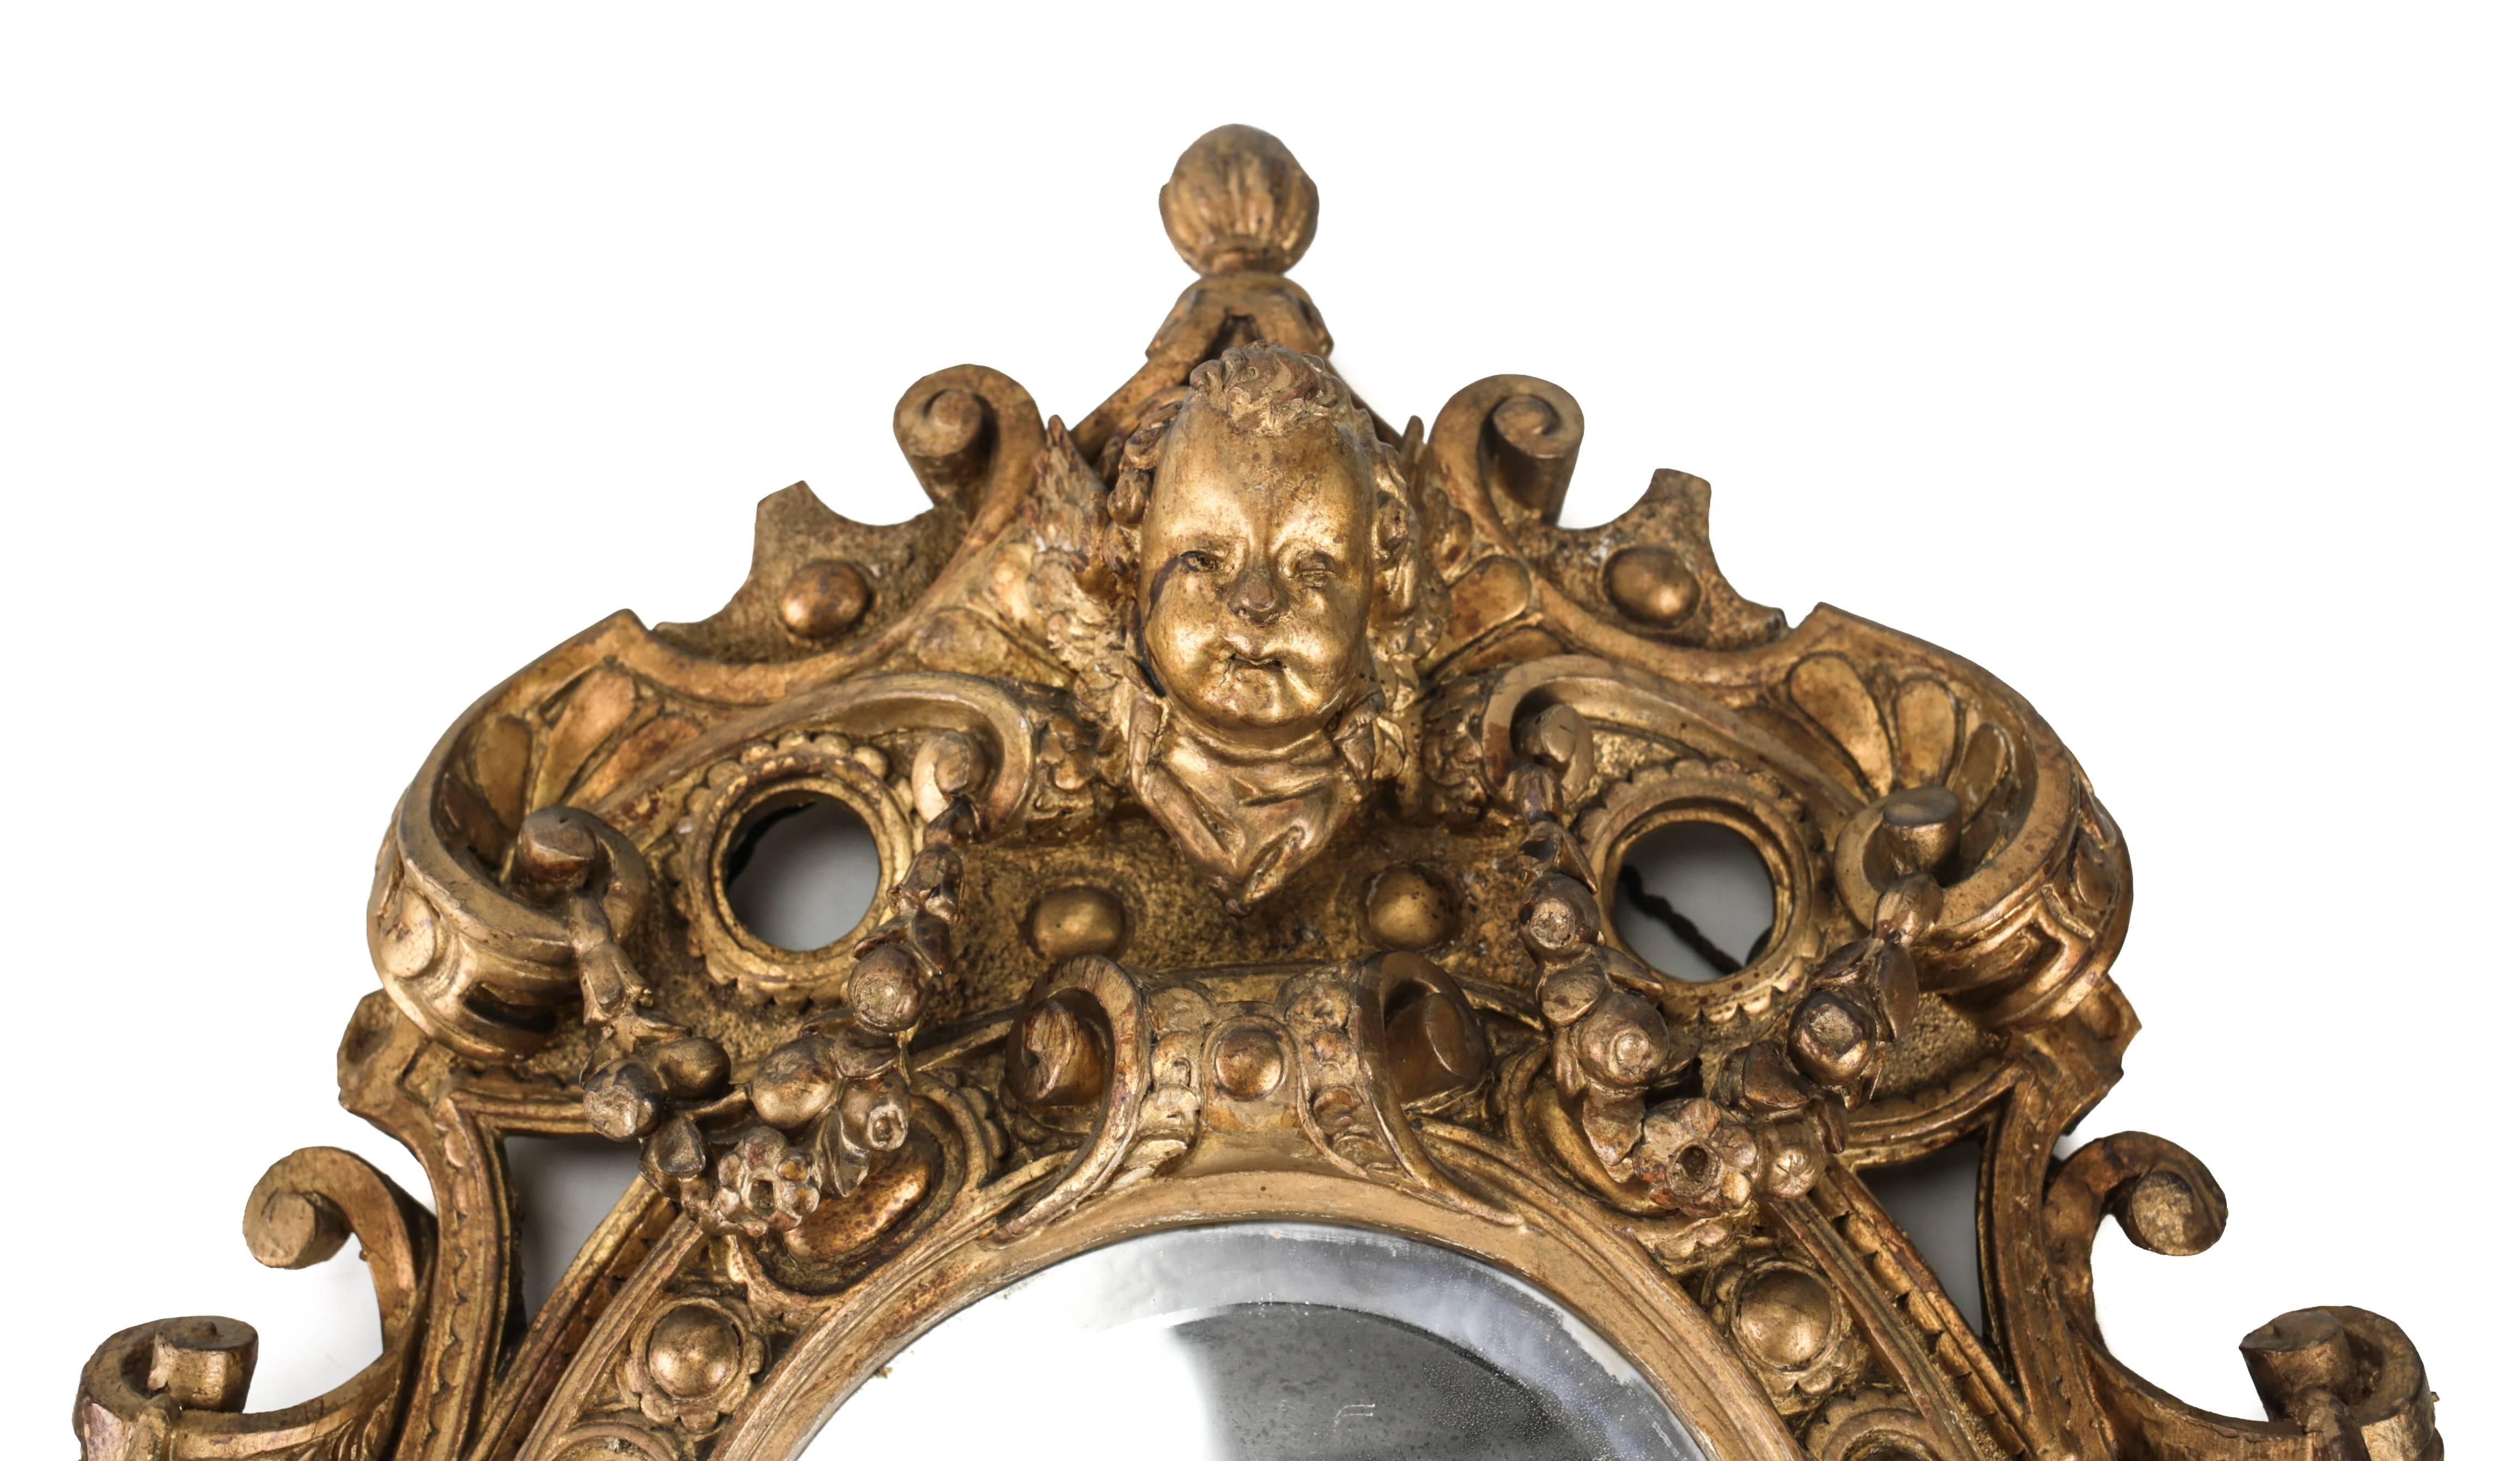 An attractive pair of oval giltwood mirrors from the late 18th century, each hand-carved with an intricate decoration of floral swags, ribbons and open work, the head of a winged cherub stationed atop each.

Previously purchased from Christie's in